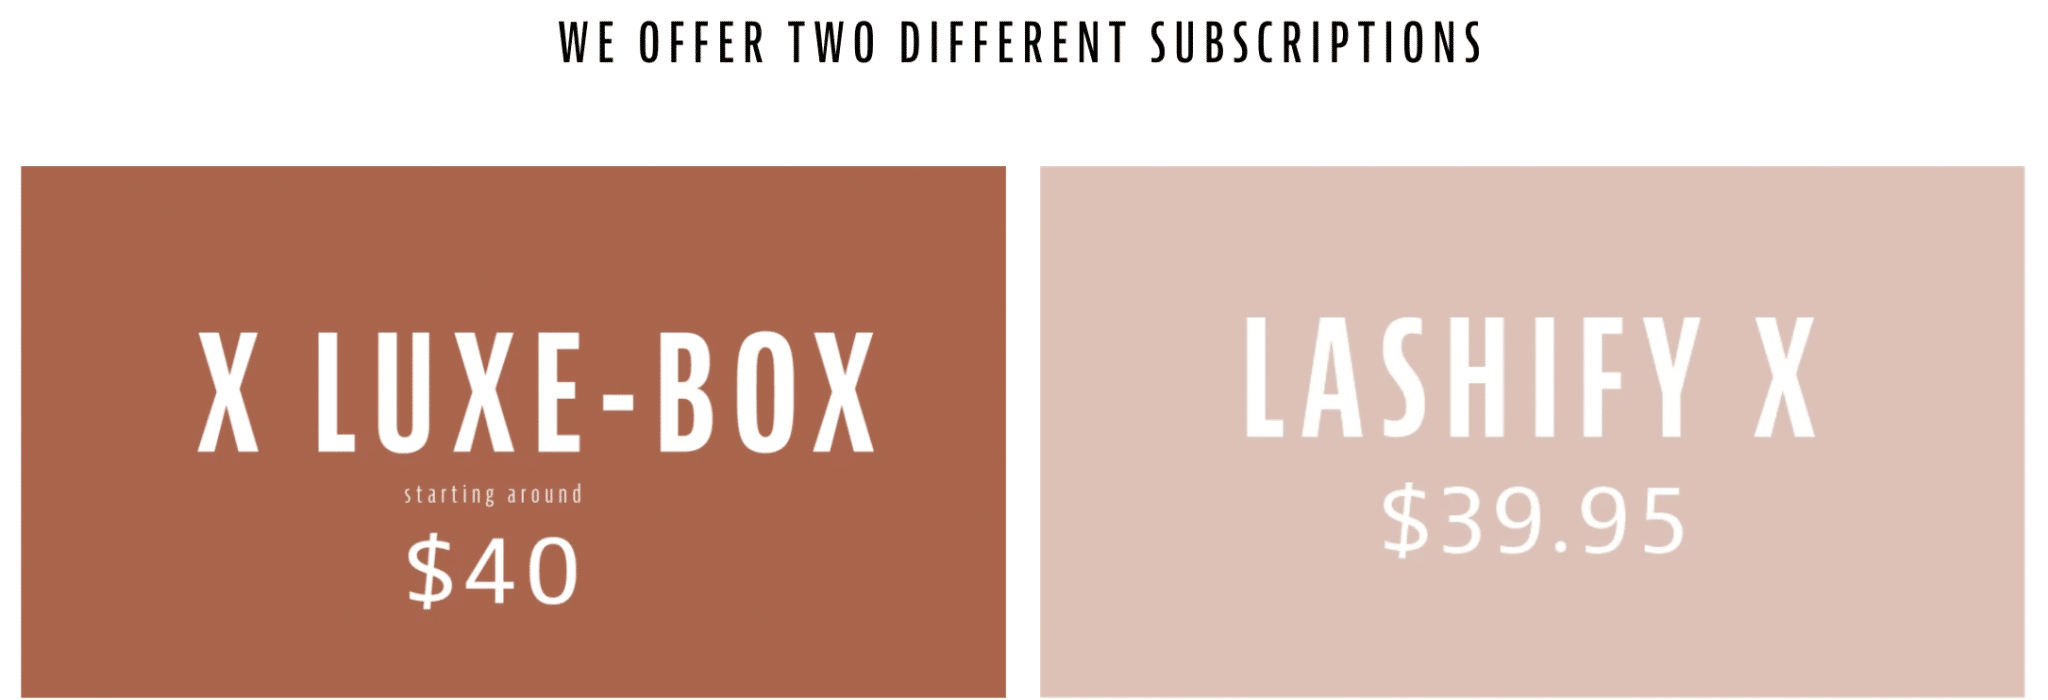 Brown banner showing two subscription options